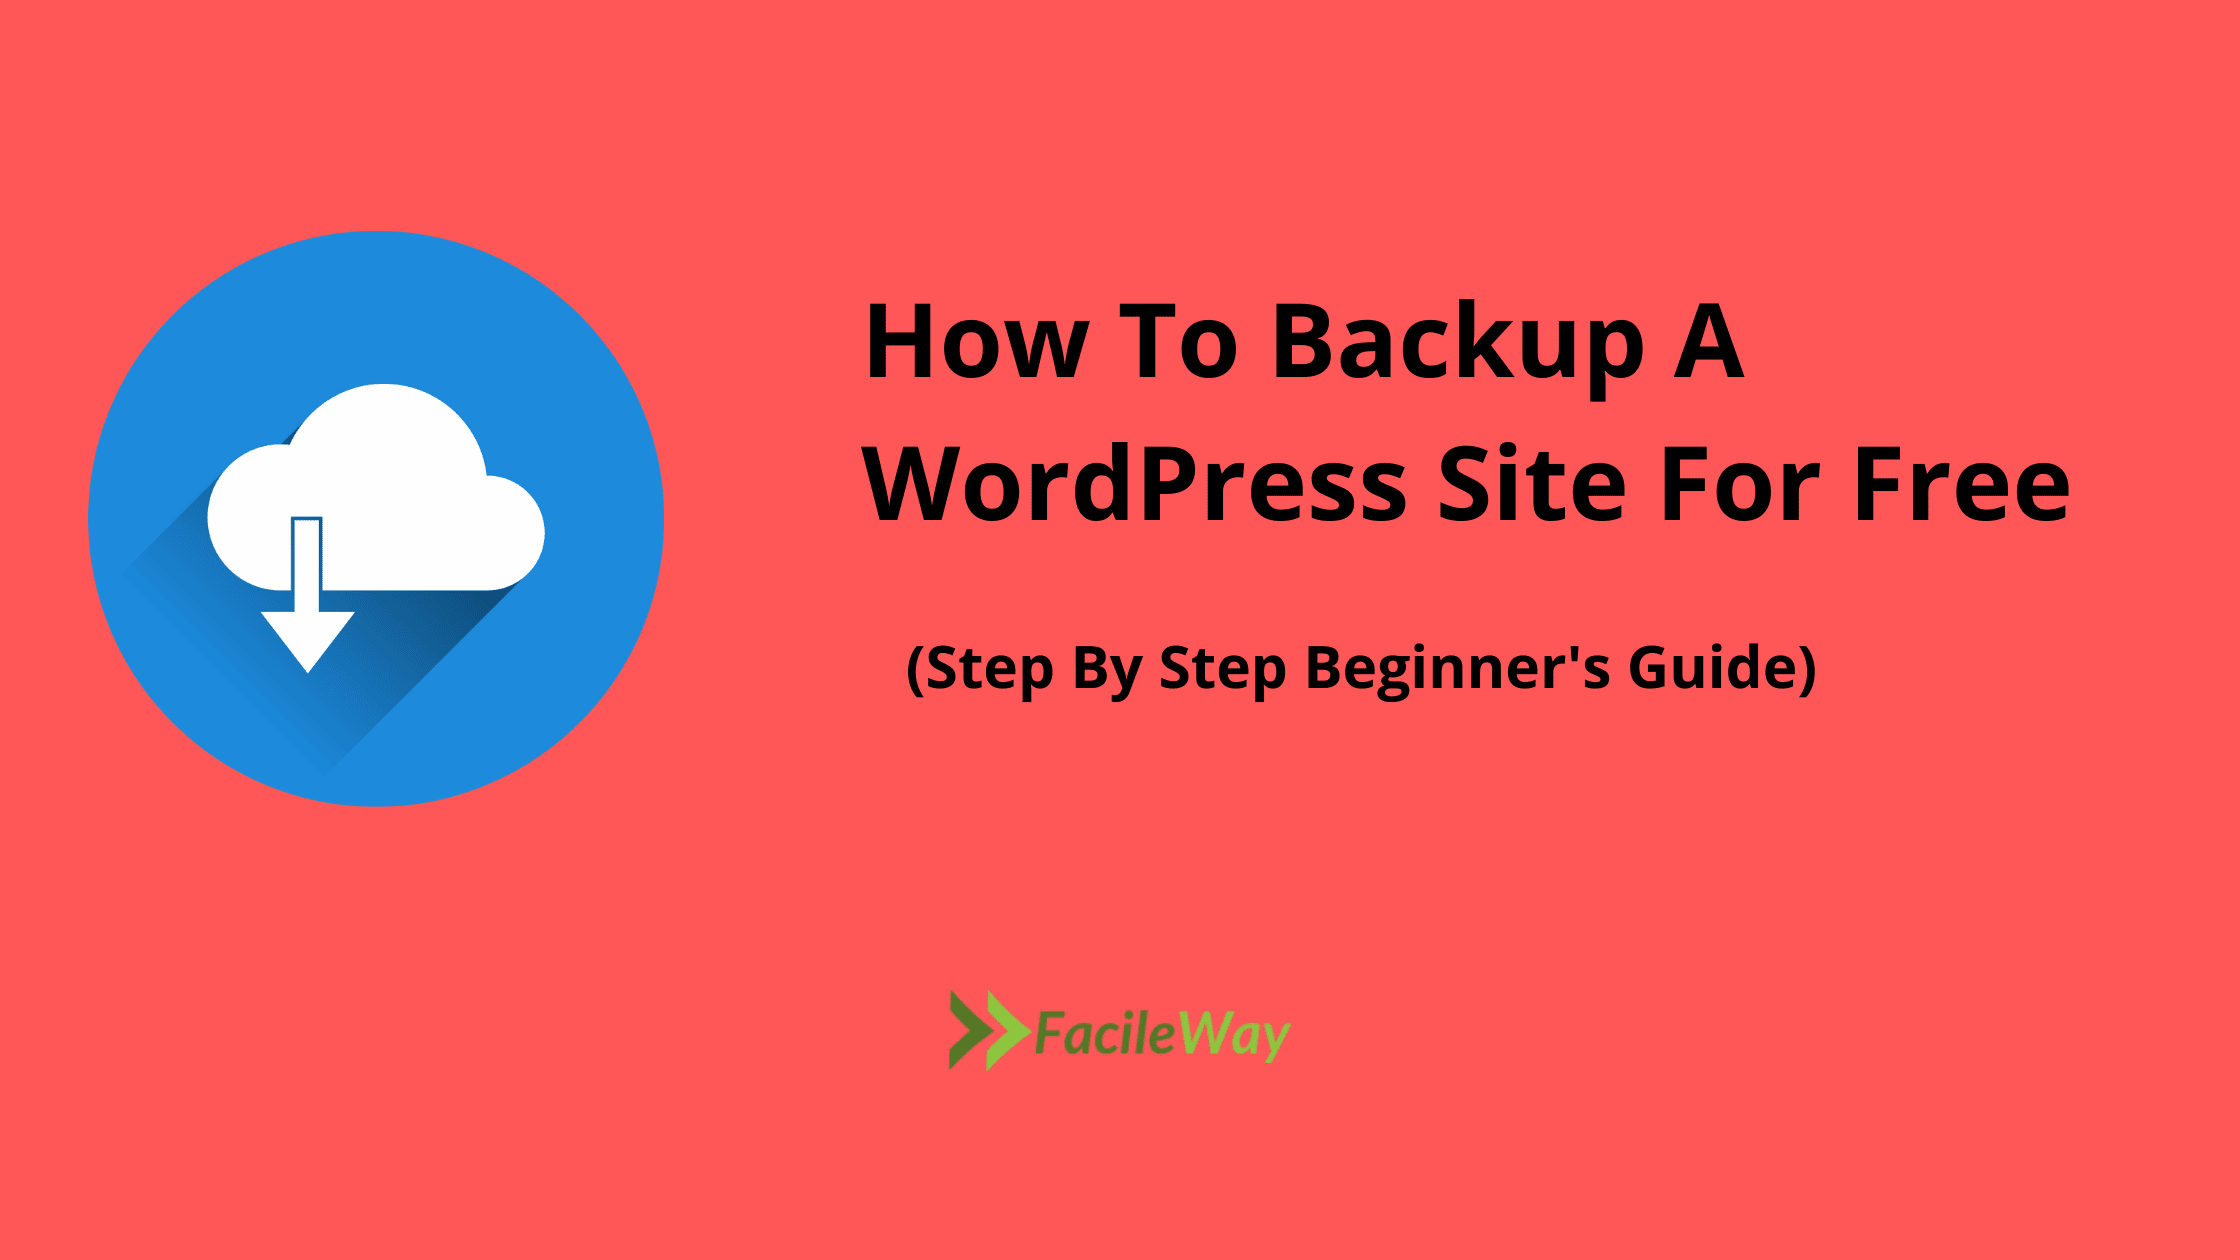 How To Backup A WordPress Site For Free